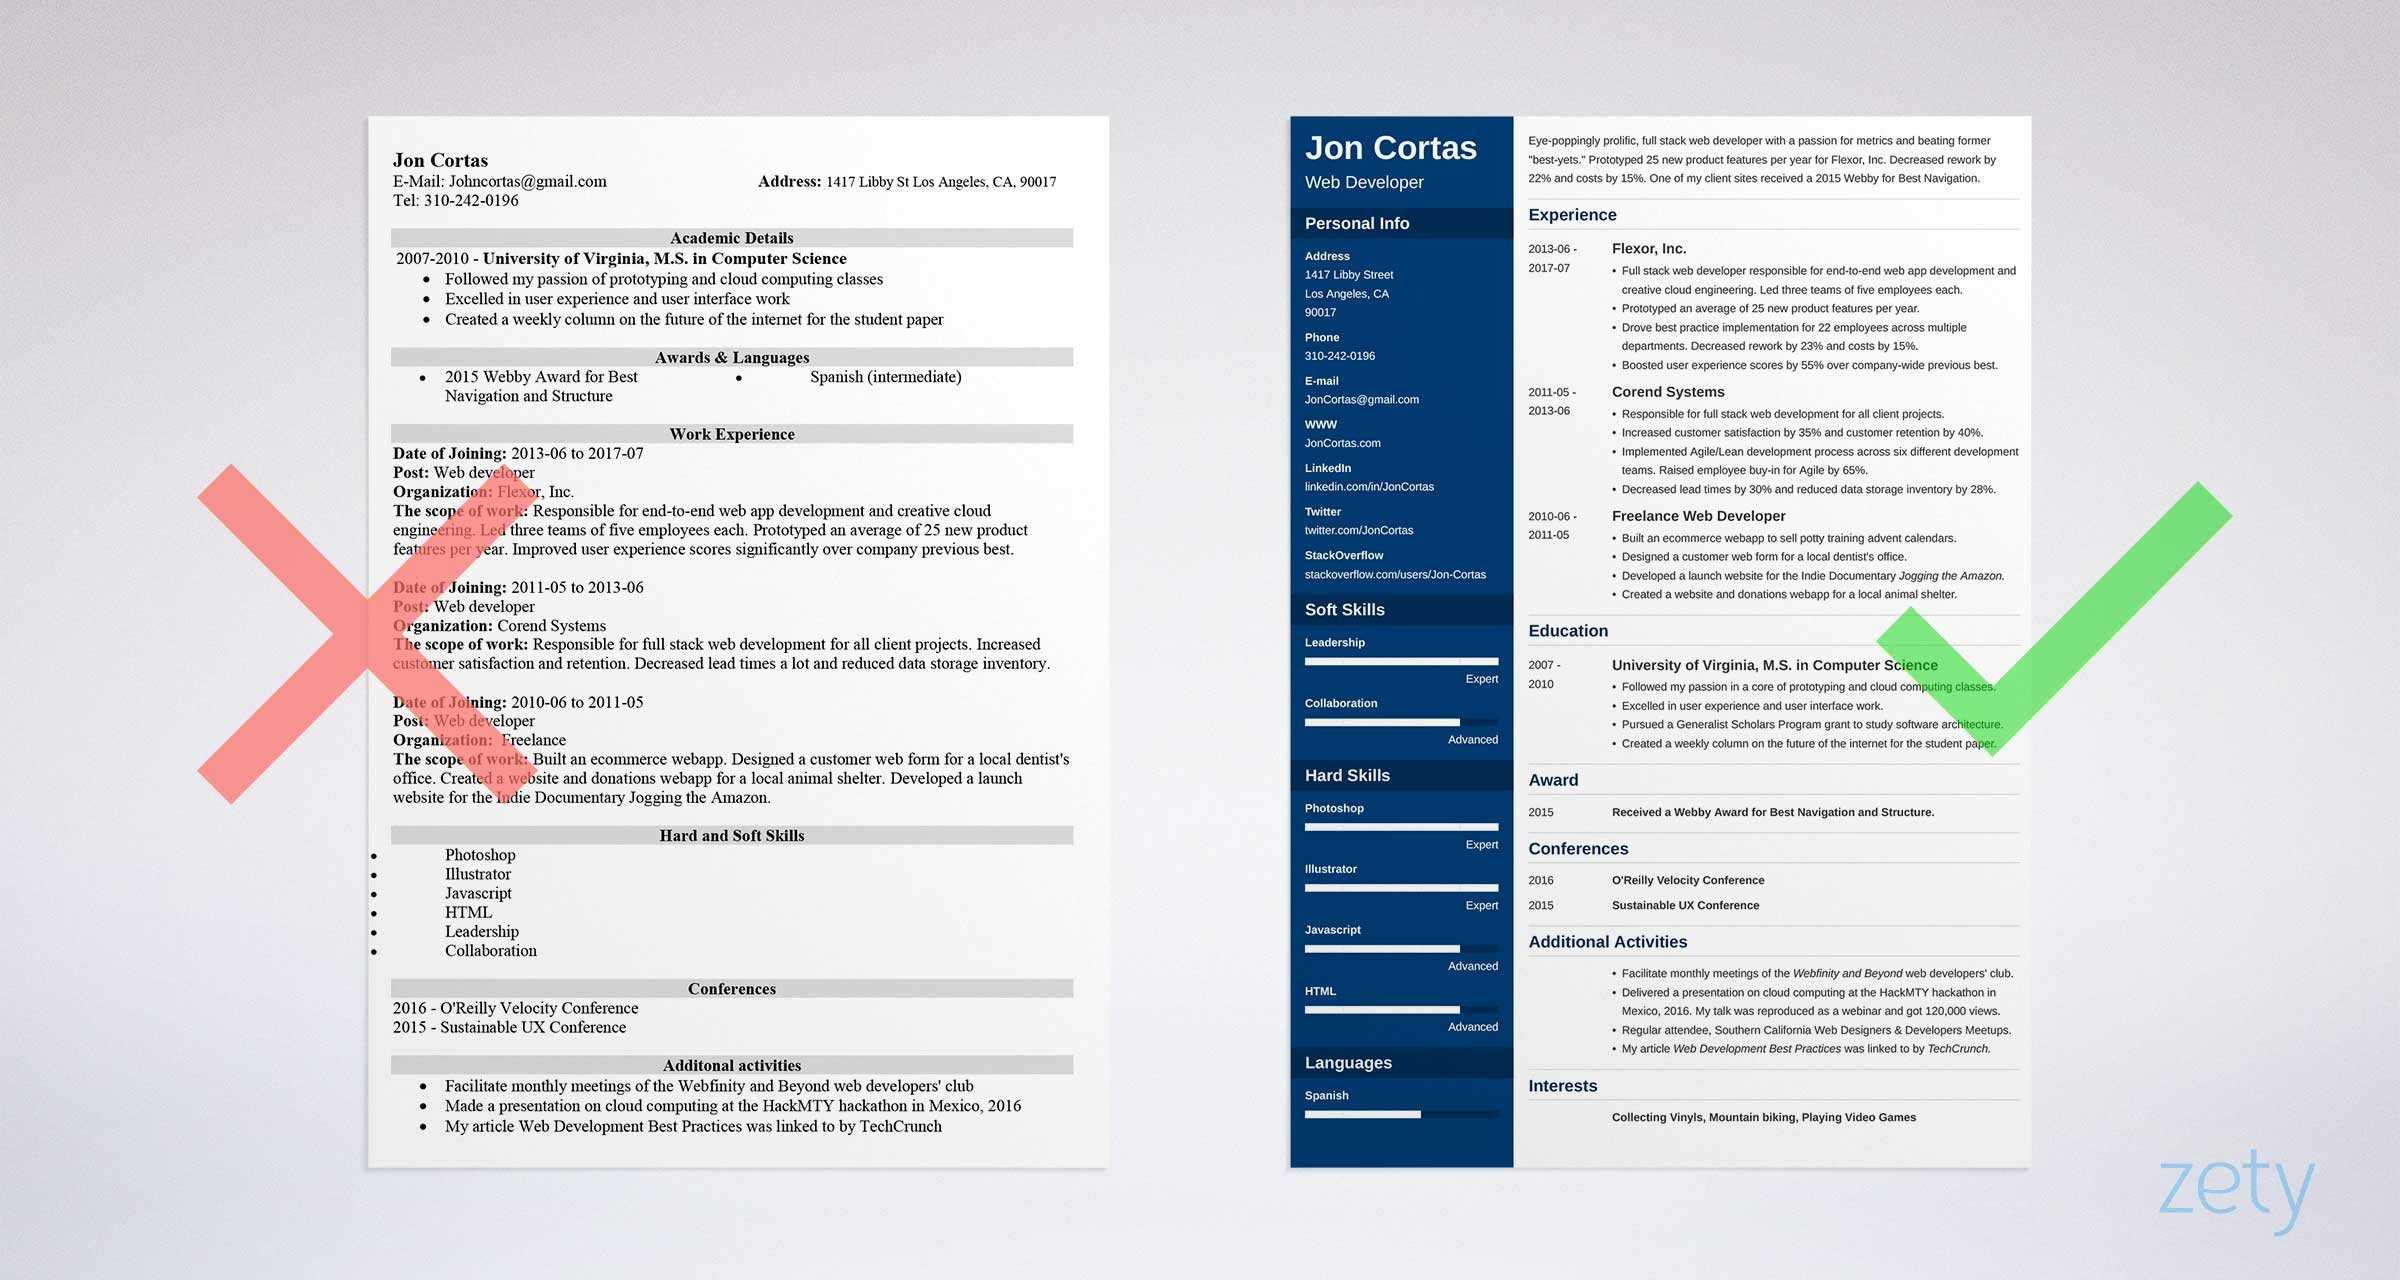 024 Cv Template Word Free Download Resume For Best Of Regarding Resume Templates Word 2007